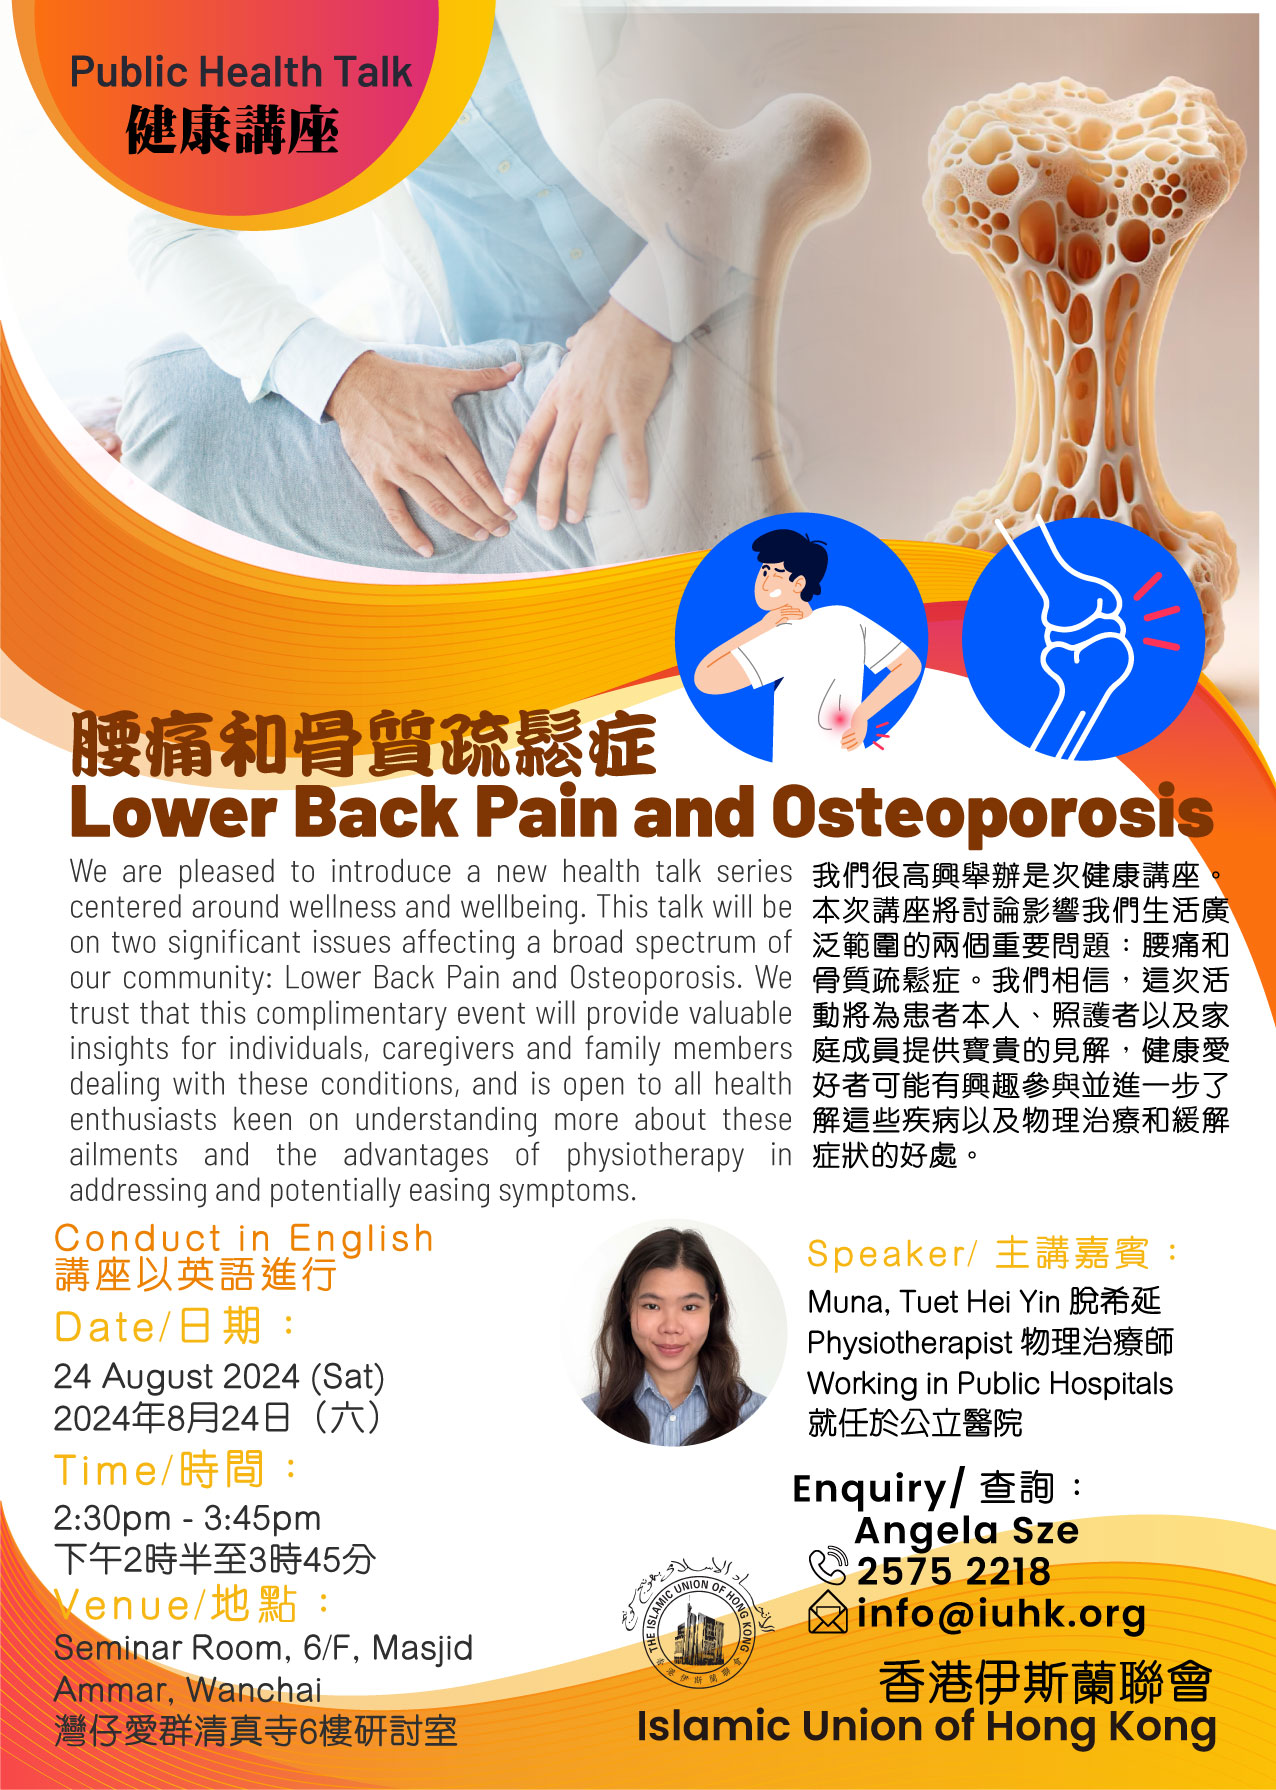 Public Health Talk - Lower Back Pain and Osteoporosis